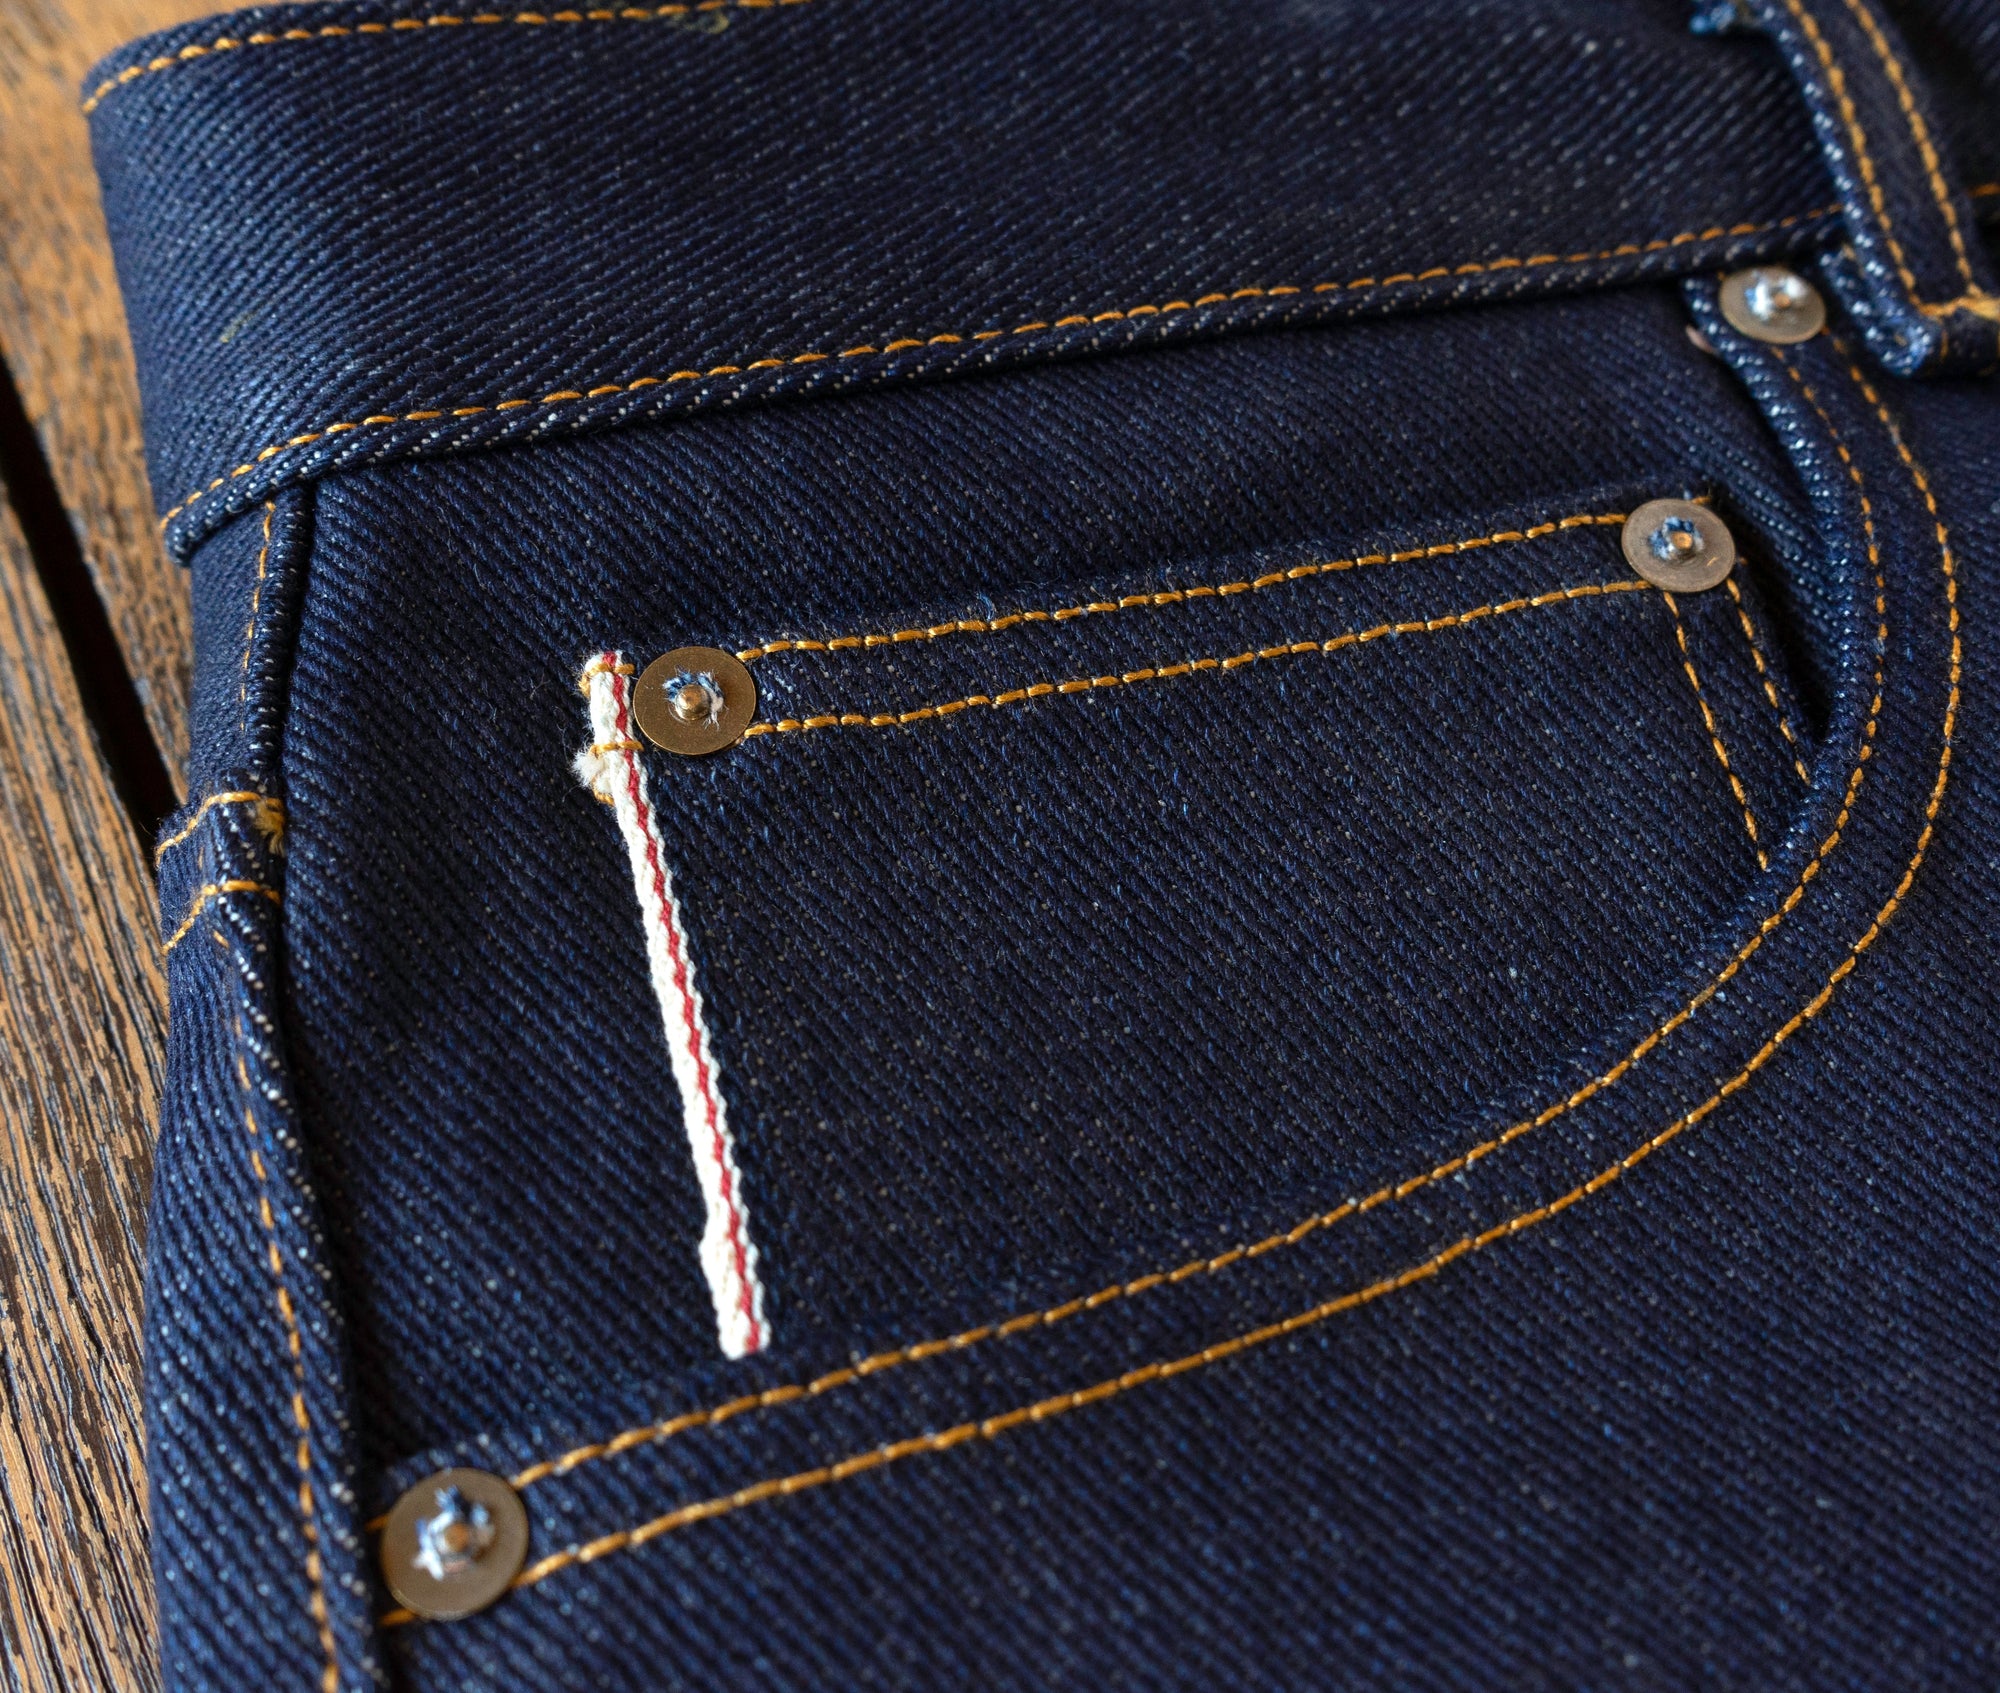 21.5 OZ JEANS - My Brave Star Selvage Review (100 Wears